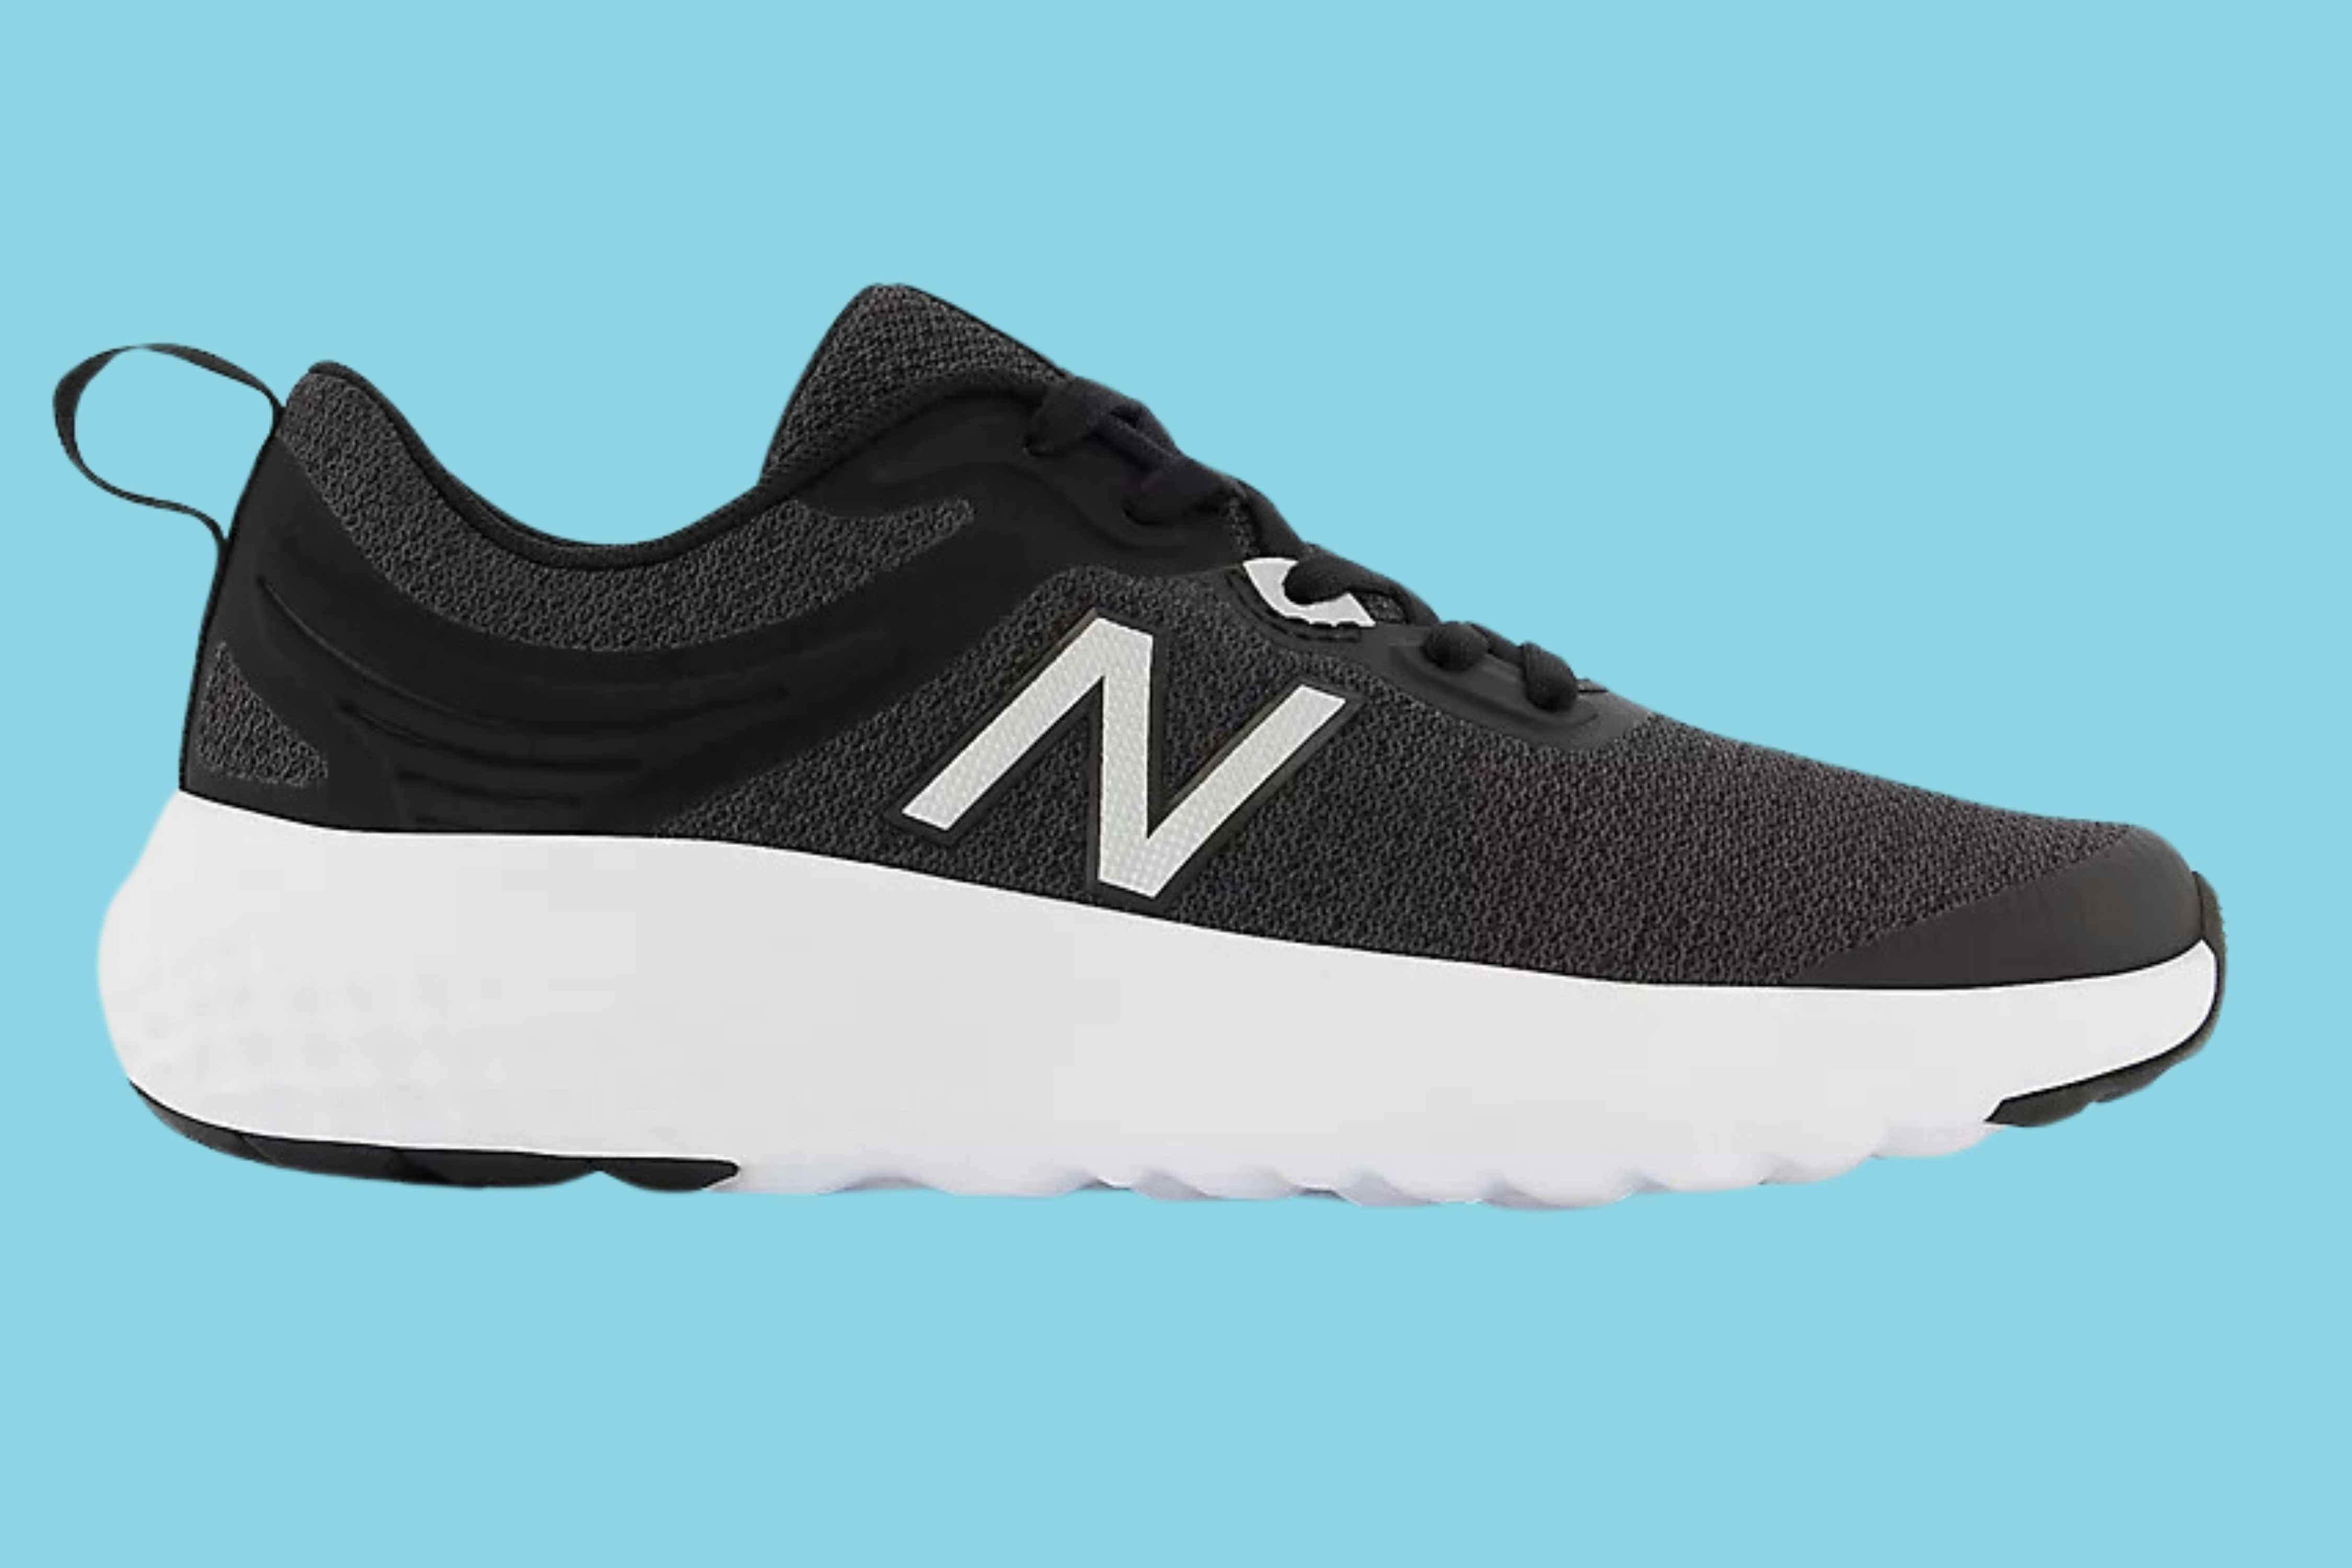 Get New Balance Women's 548 Shoes for Only $28